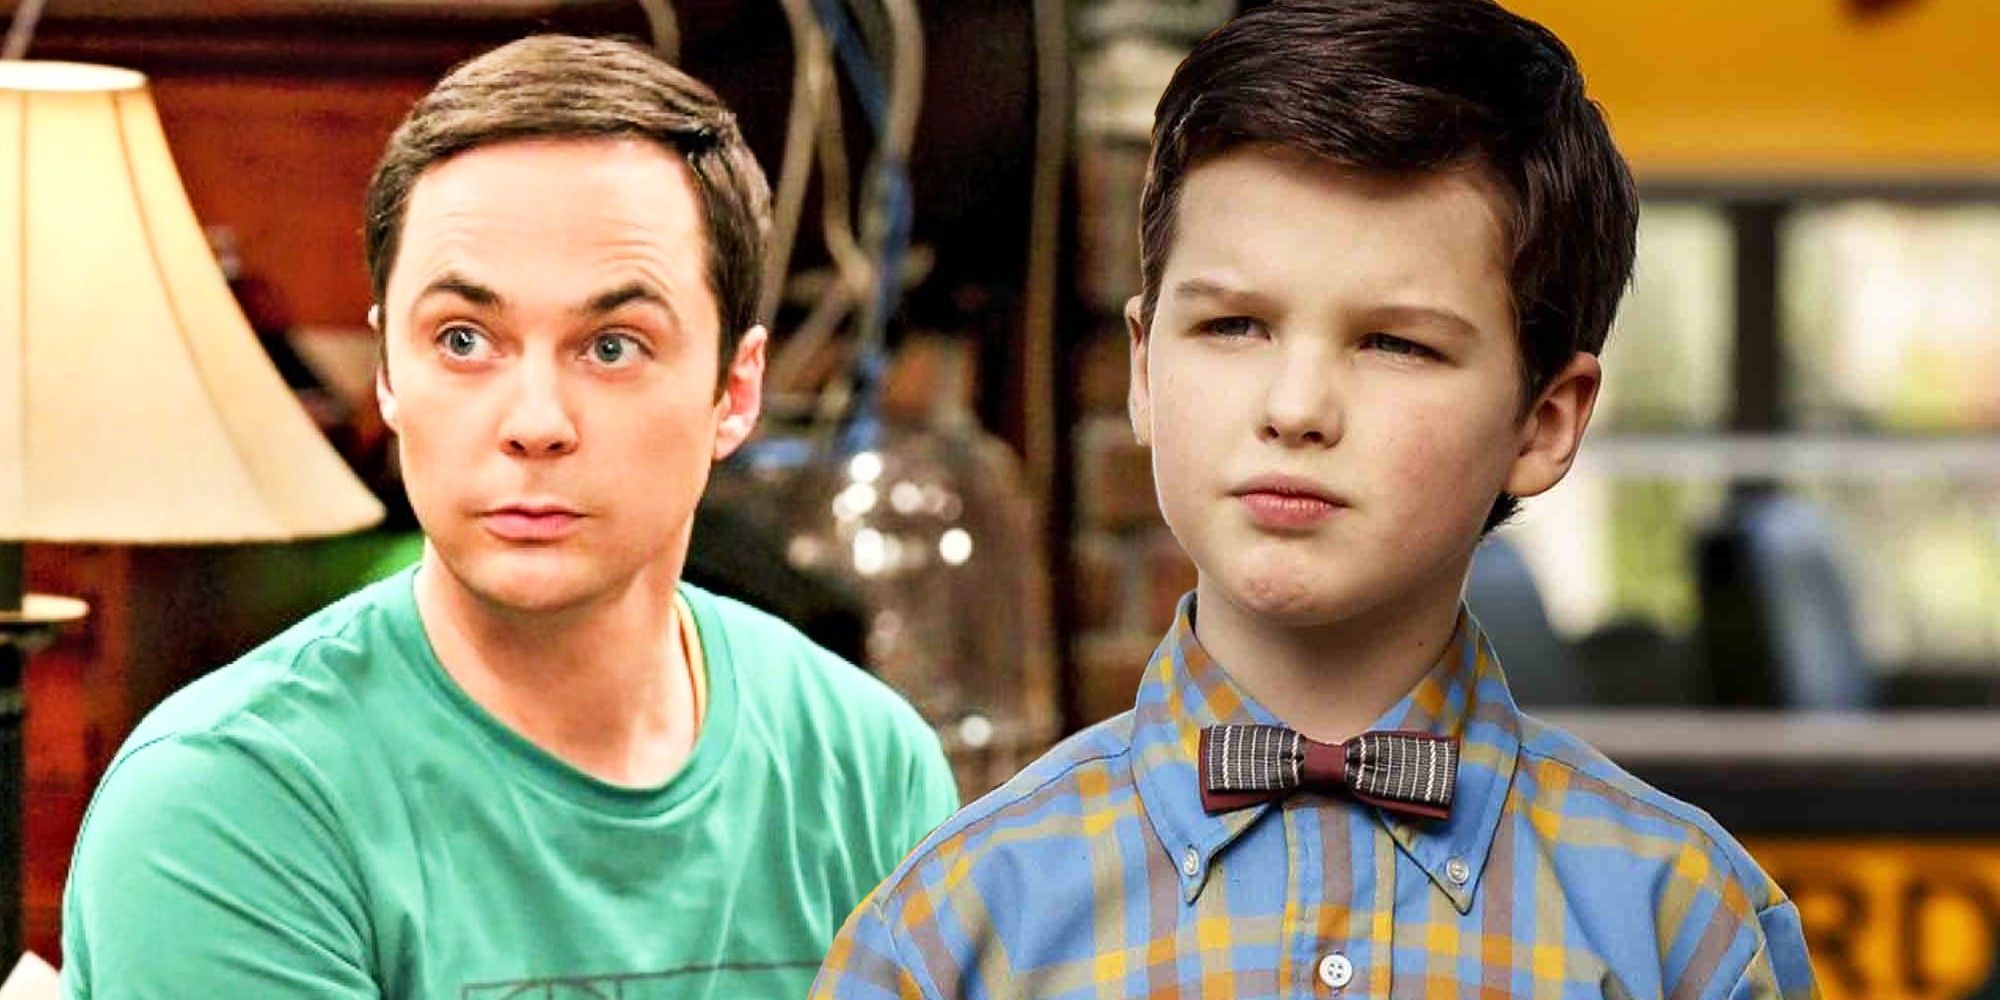 Jim Parsons and Iain Armitage as Sheldon Cooper from The Big Bang Theory and Young Sheldon